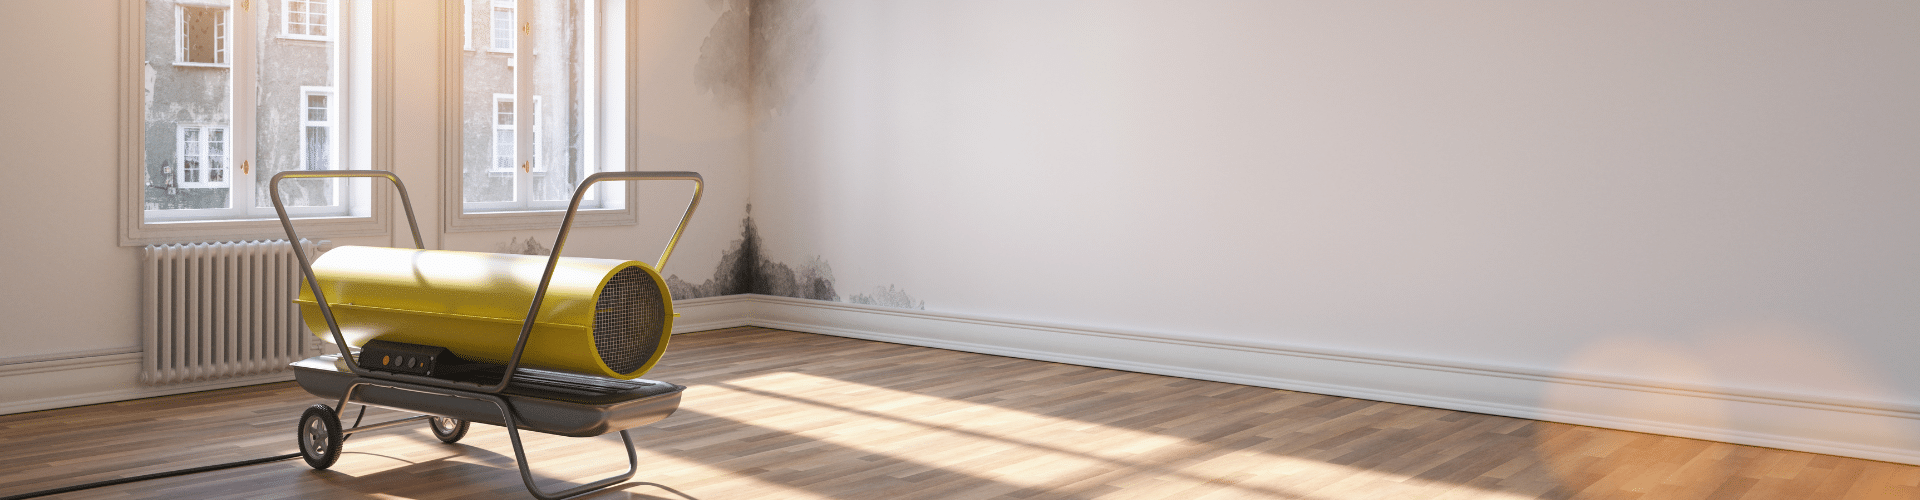 mold remediation in bronx